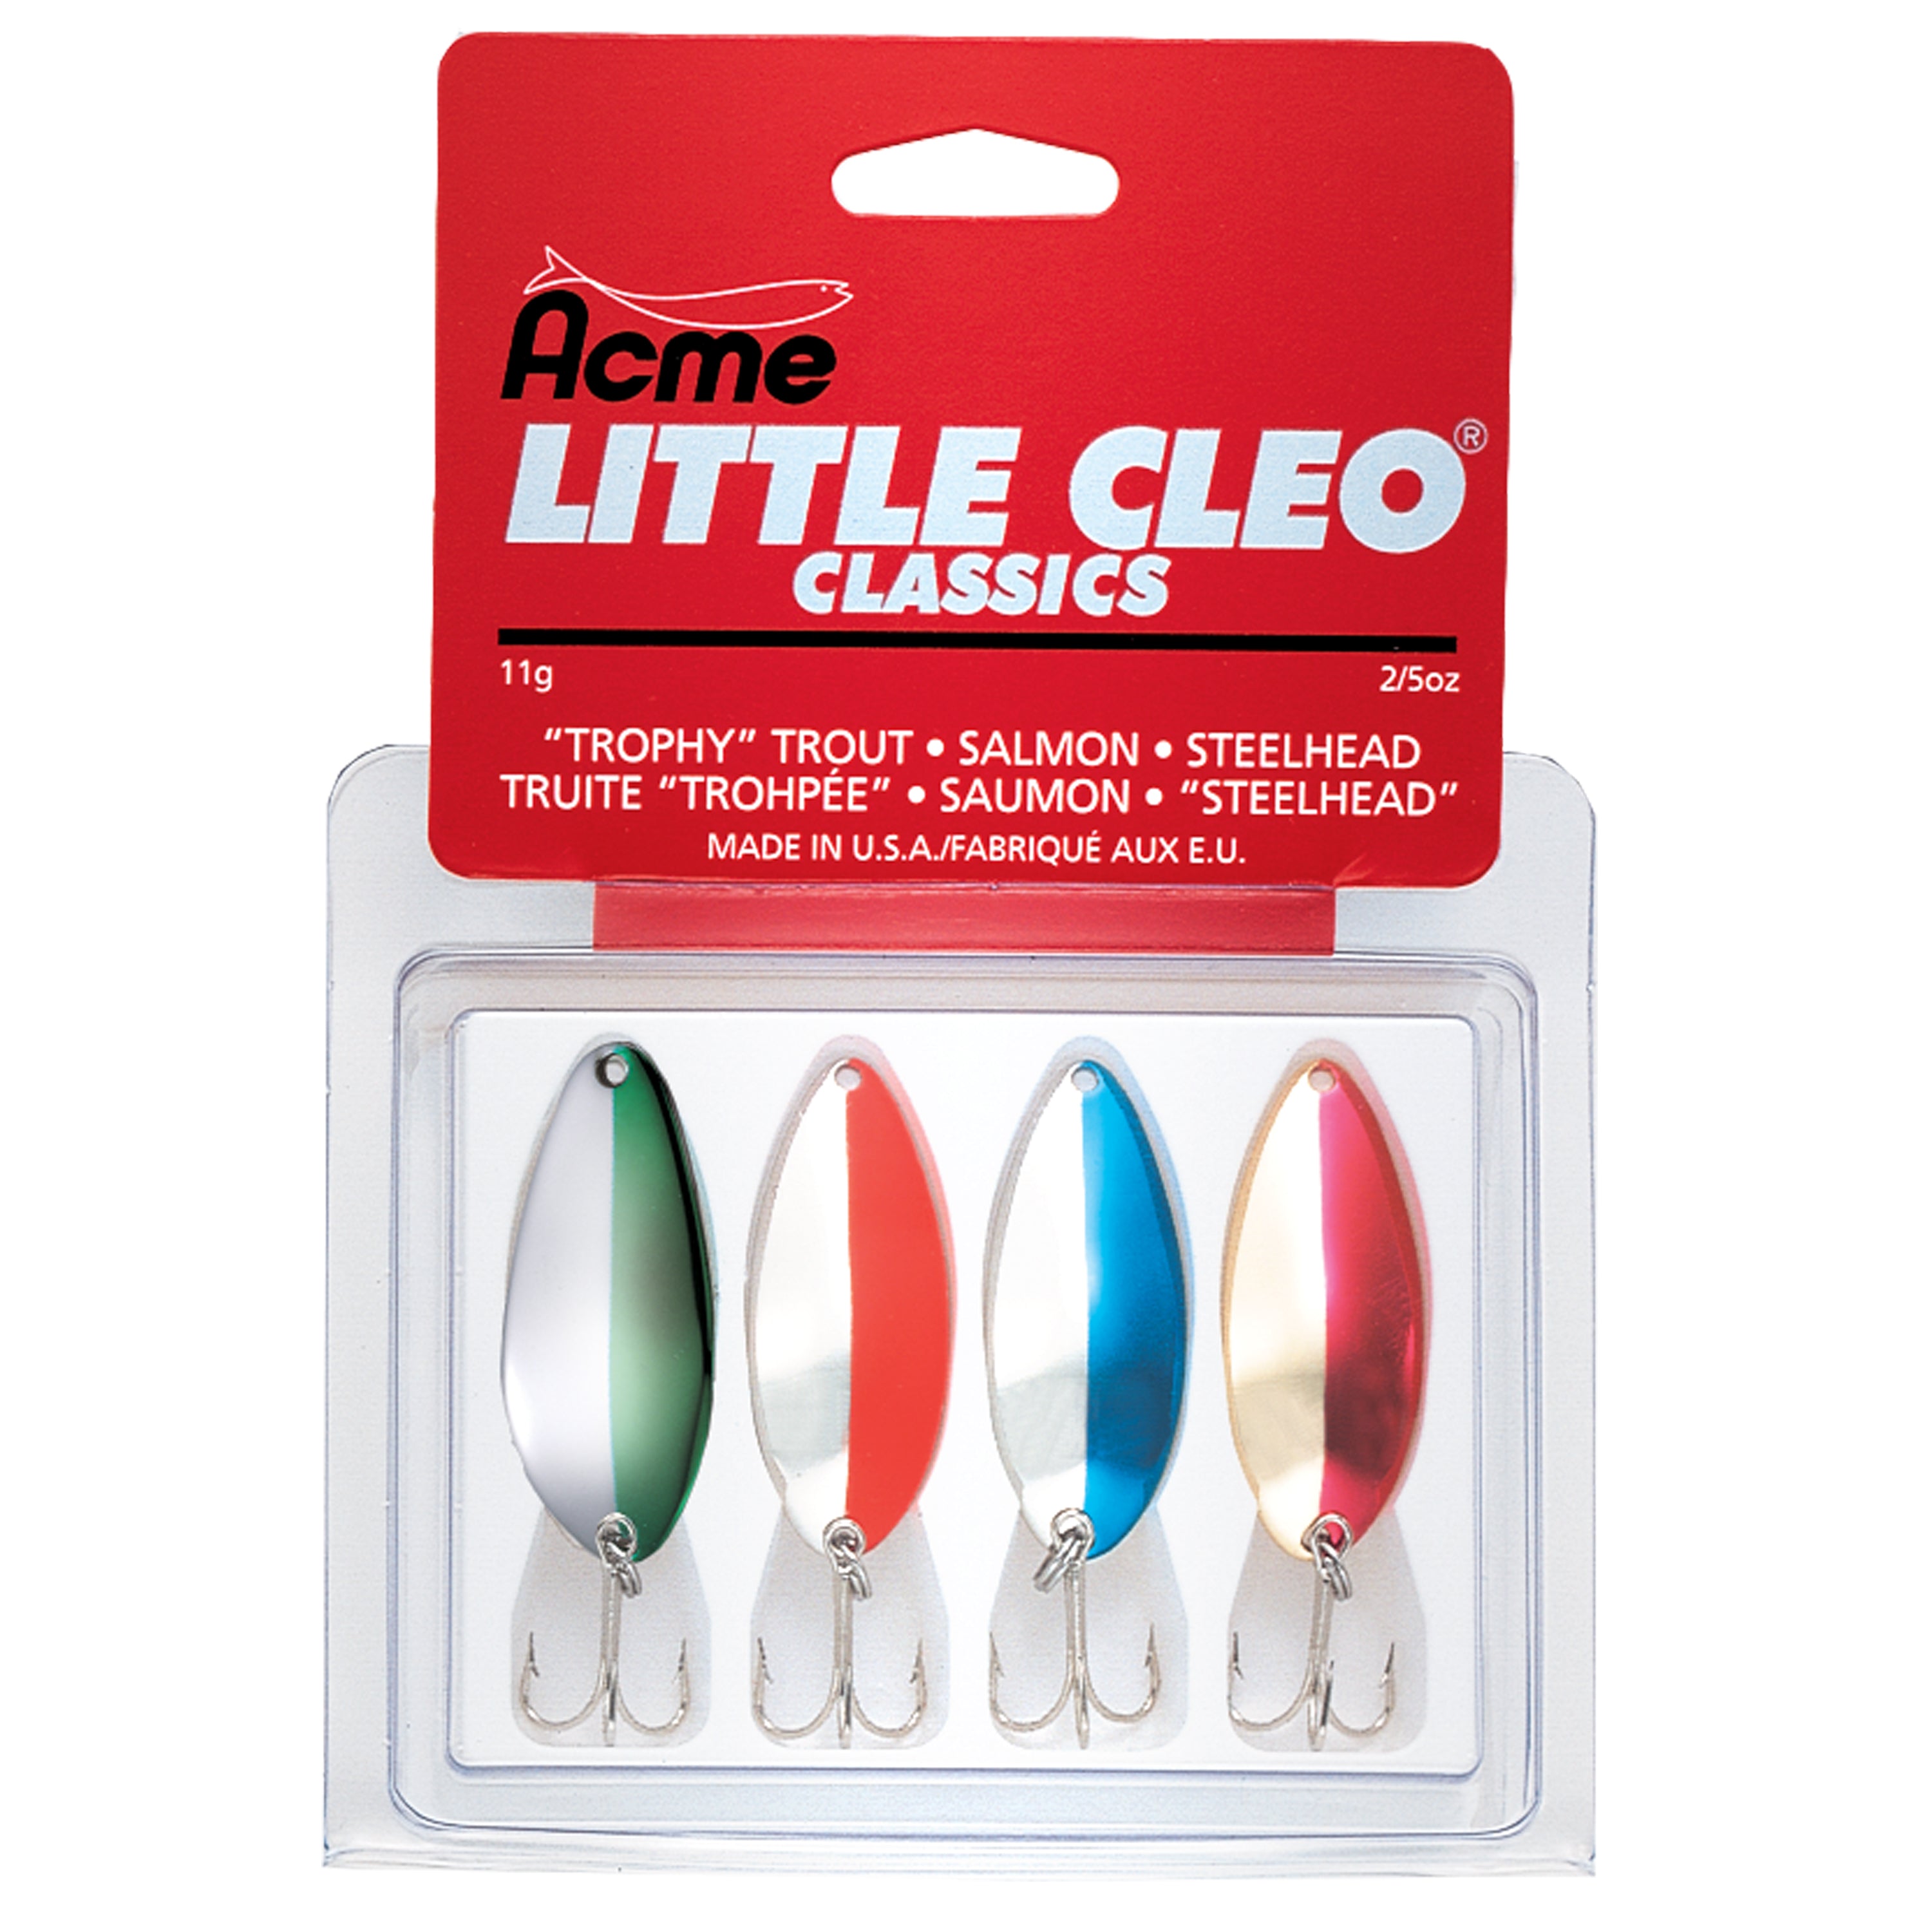 Acme Tackle - Little Cleo Classic Kit-4 Pack - Acme Tackle Company